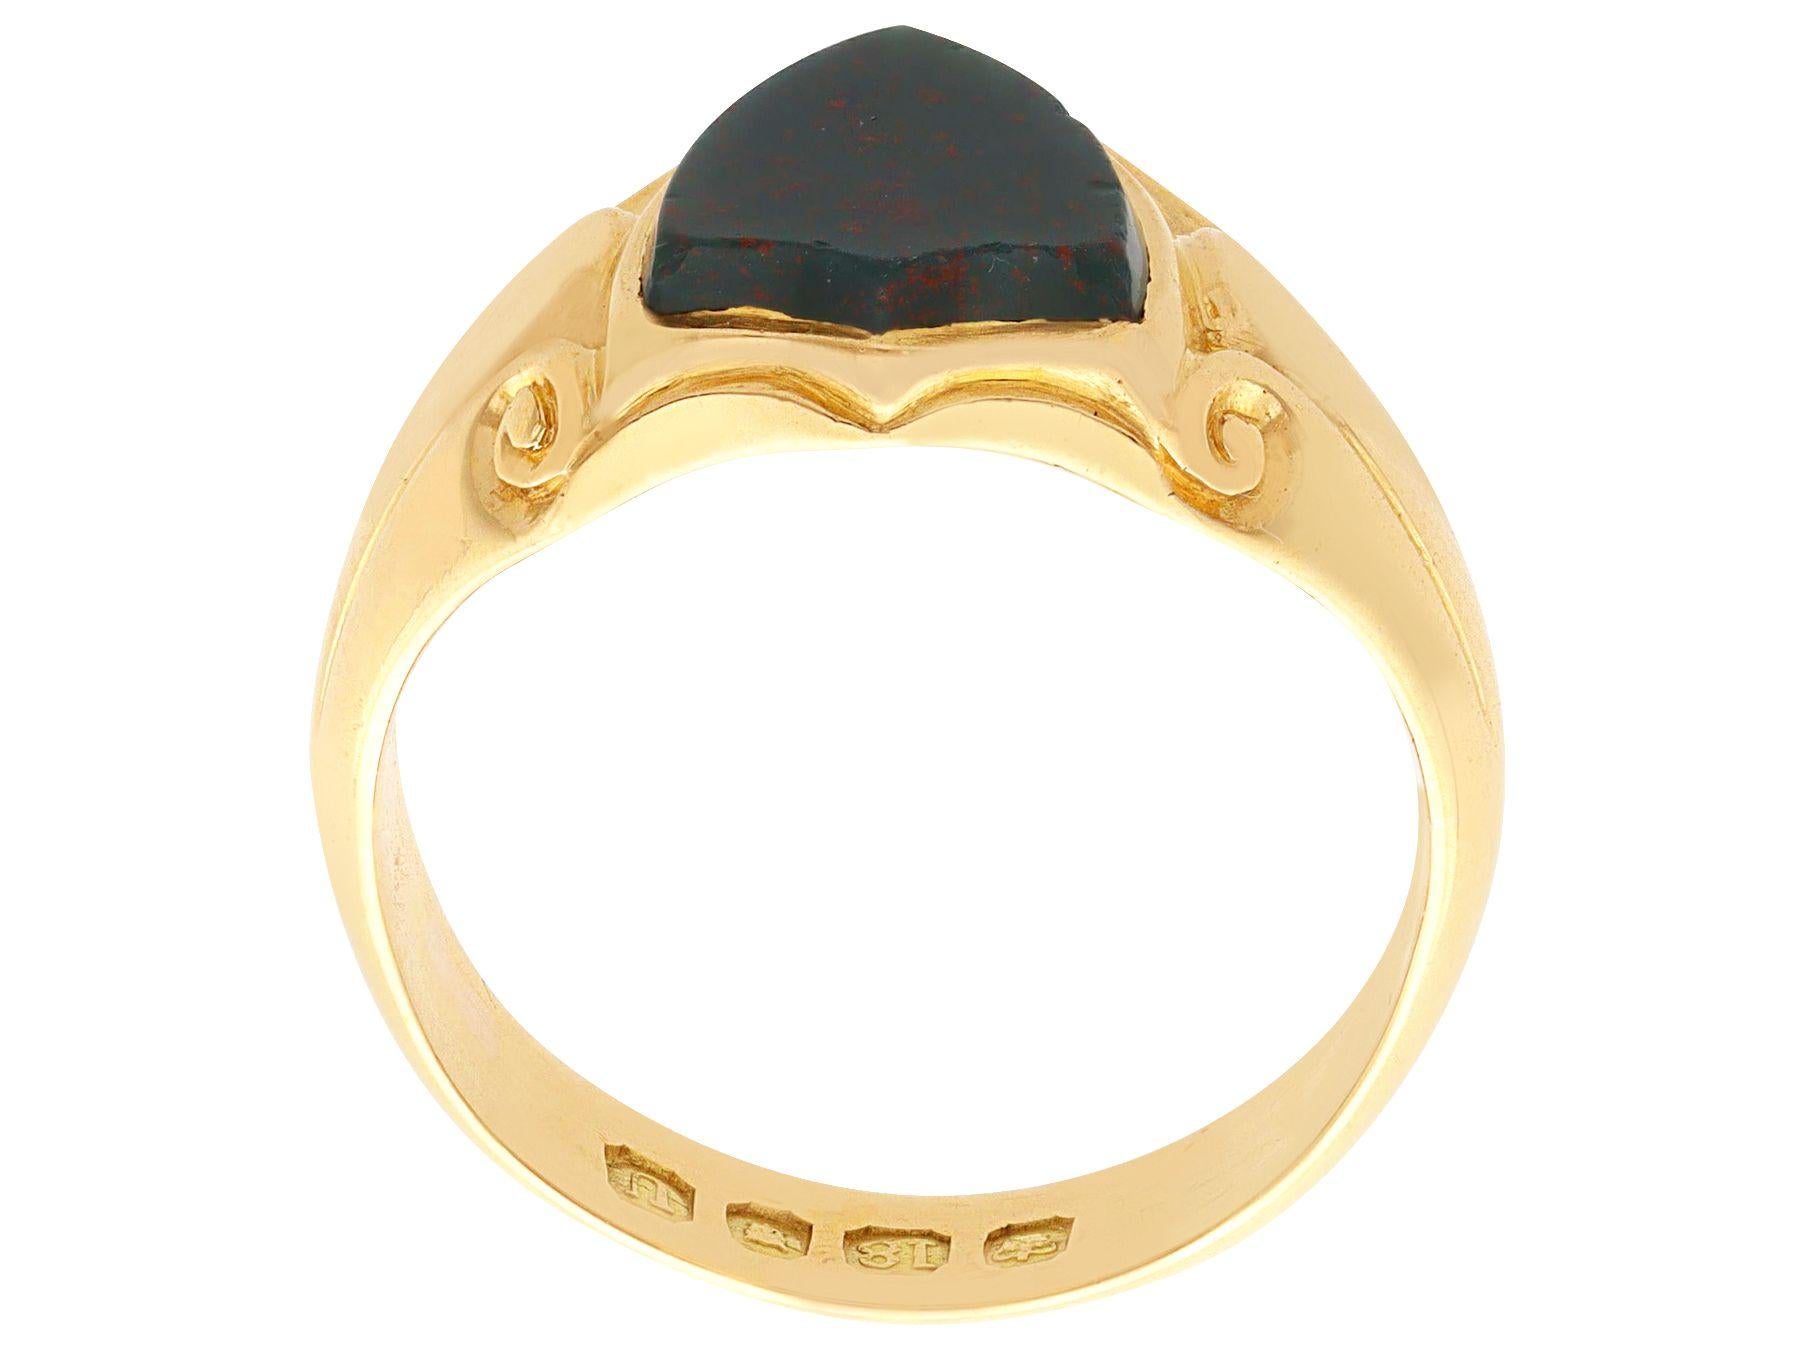 Antique Victorian Bloodstone and Yellow Gold Signet Ring In Excellent Condition For Sale In Jesmond, Newcastle Upon Tyne